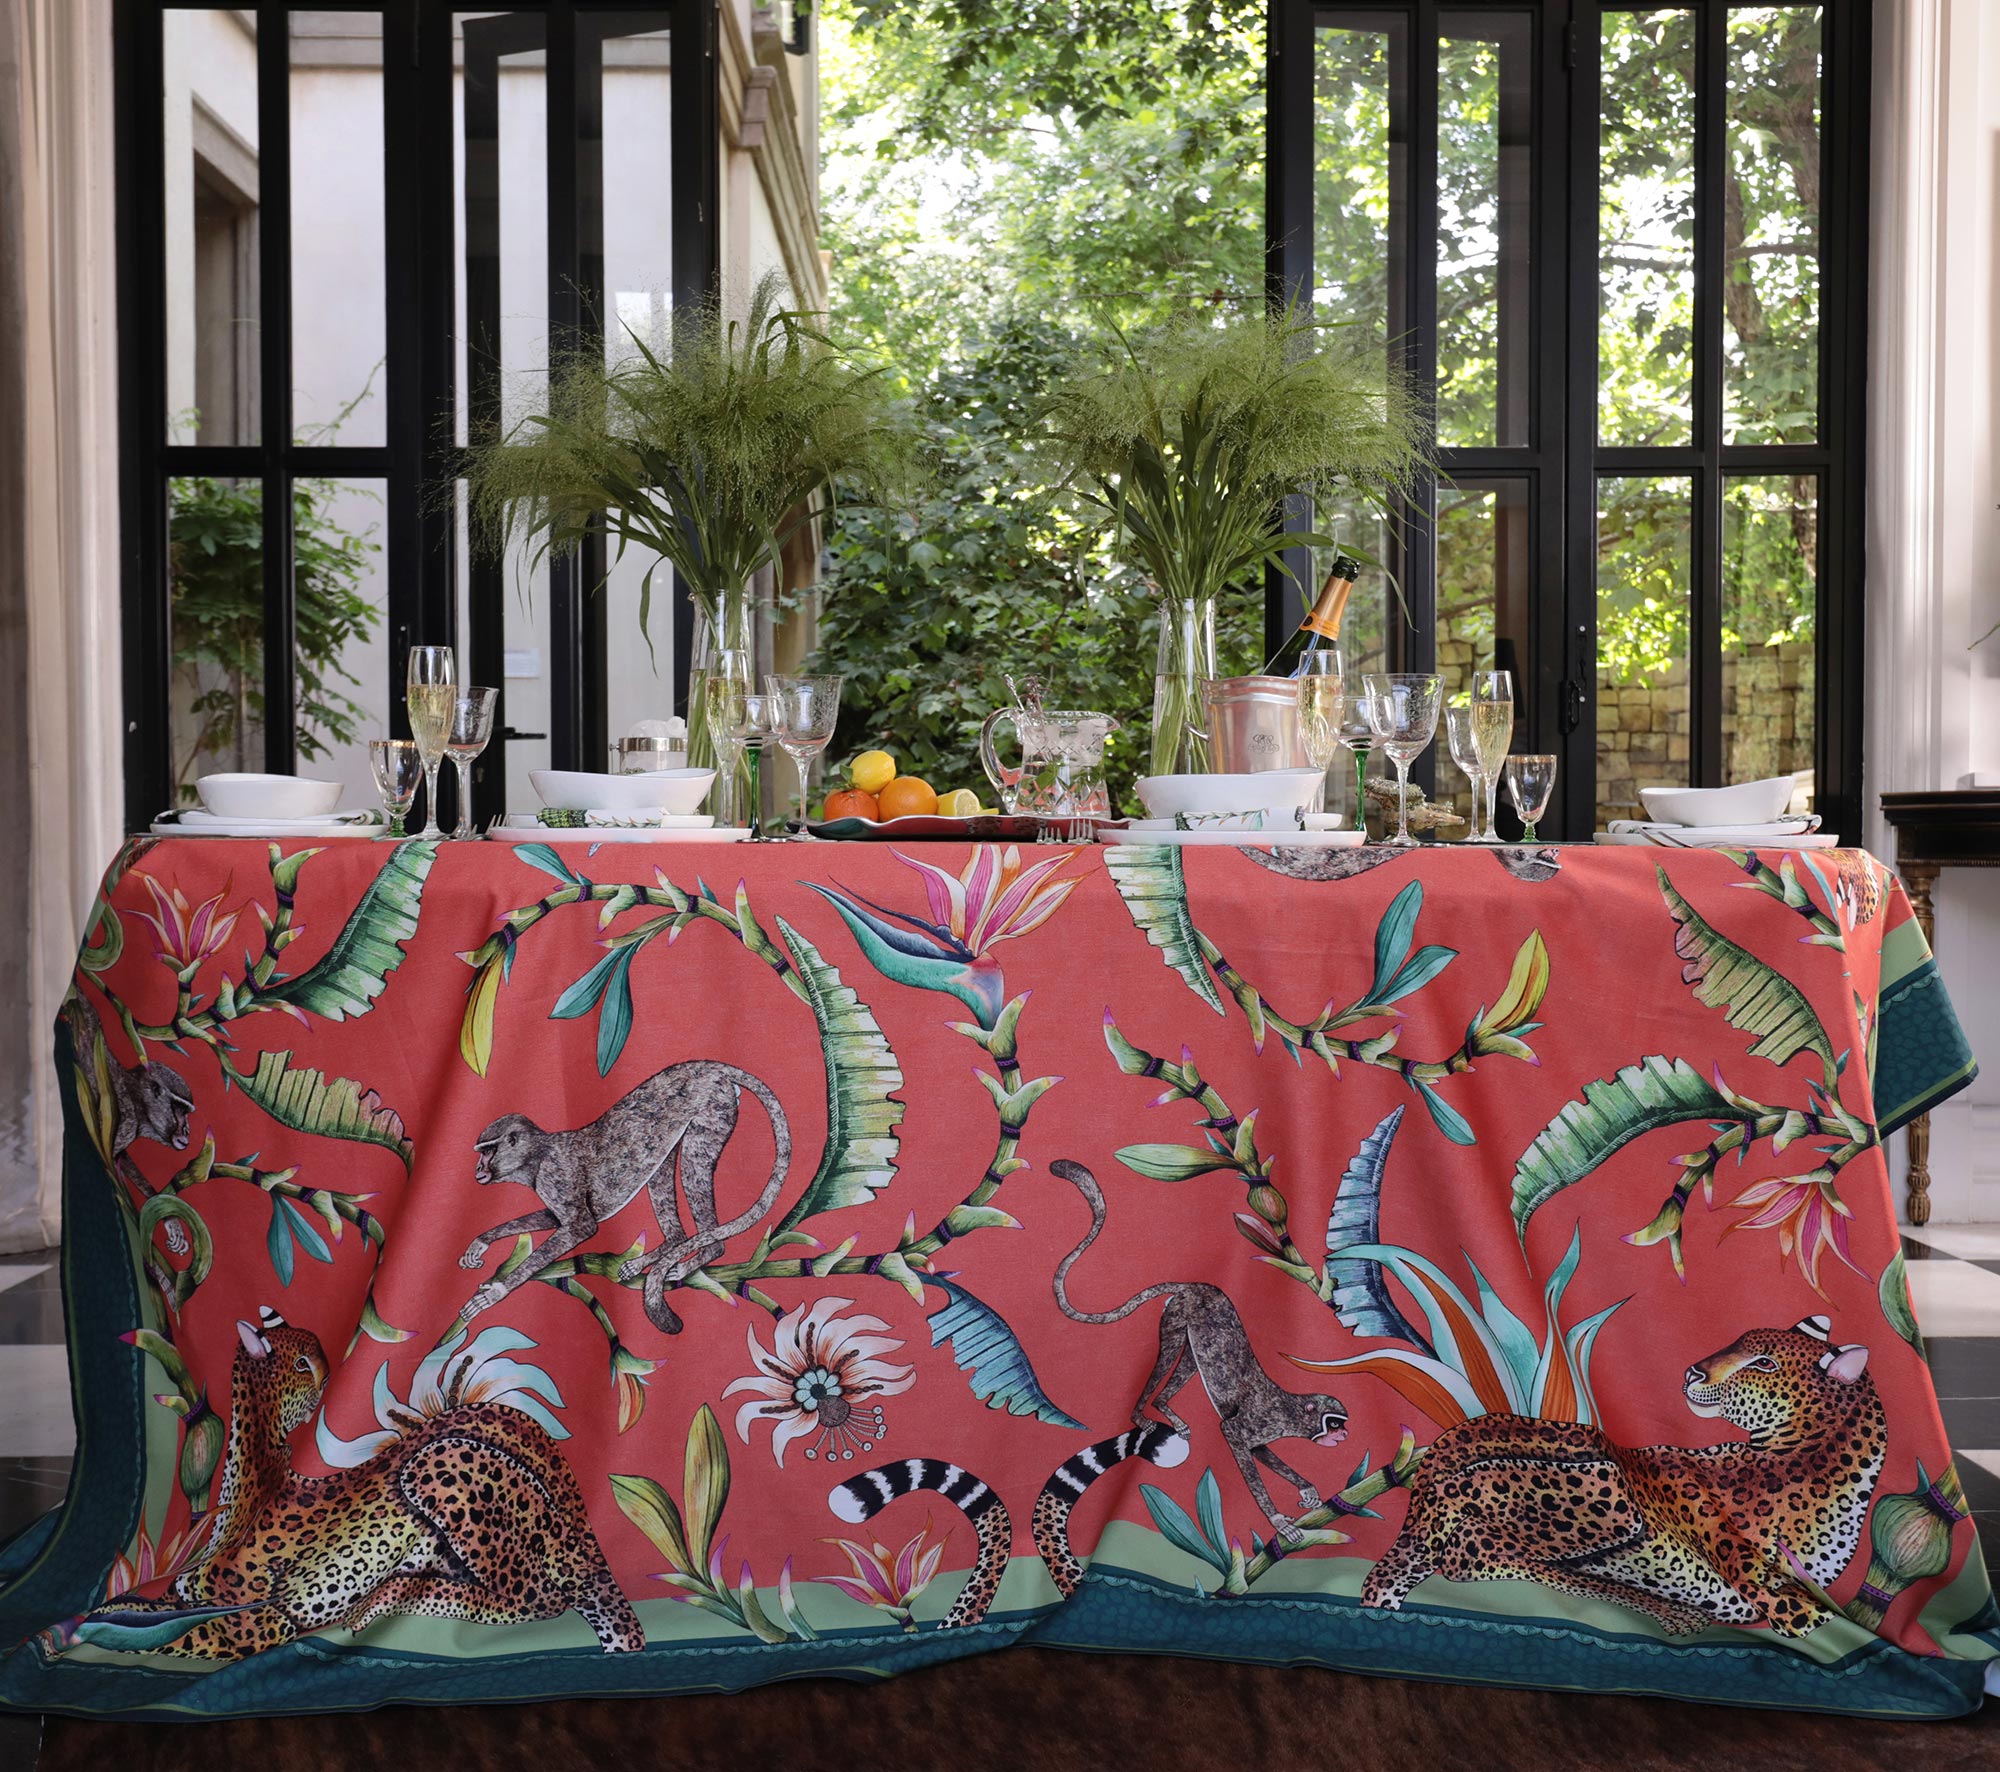 Monkey Paradise Tablecloth - Cotton - Coral - Small